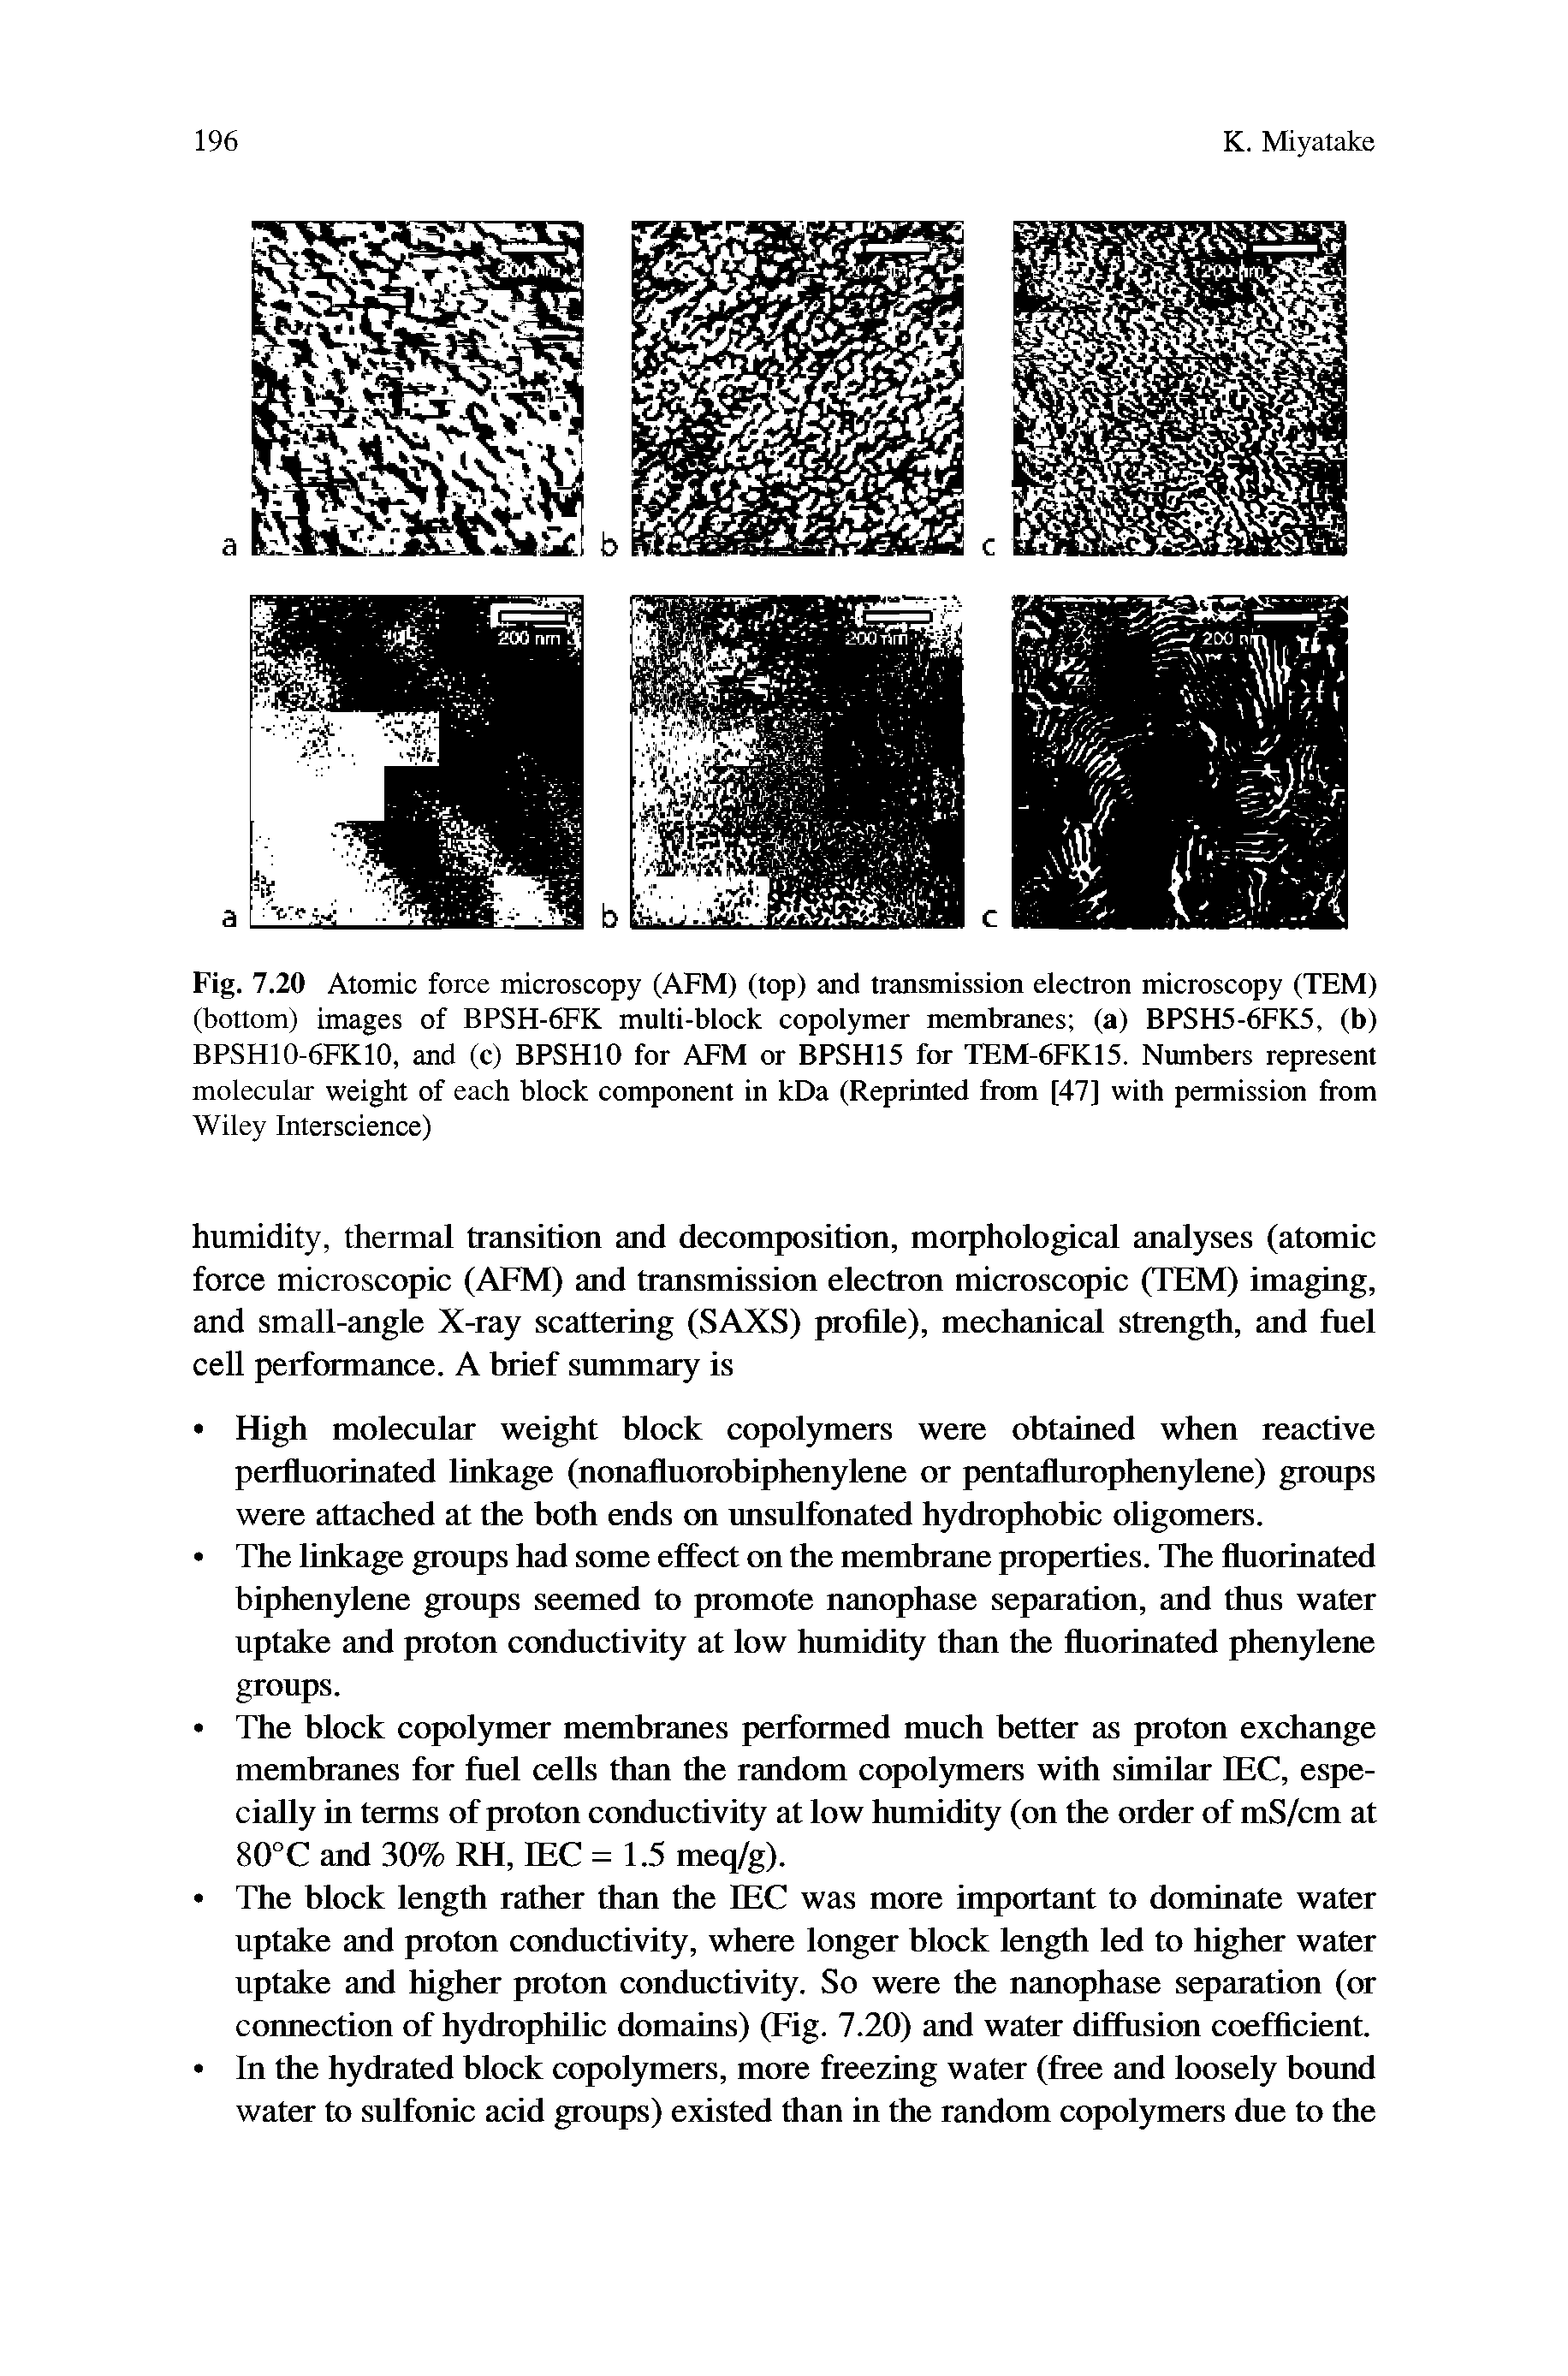 Fig. 7.20 Atomic force microscopy (AFM) (top) and transmission electron microscopy (TEM) (bottom) images of BPSH-6FK multi-block copolymer membranes (a) BPSH5-6FK5, (b) BPSH10-6FK10, and (c) BPSHIO for AFM or BPSH15 for TEM-6FK15. Numbers represent molecular weight of each block component in kDa (Reprinted from [47] with permission from Wiley Interscience)...